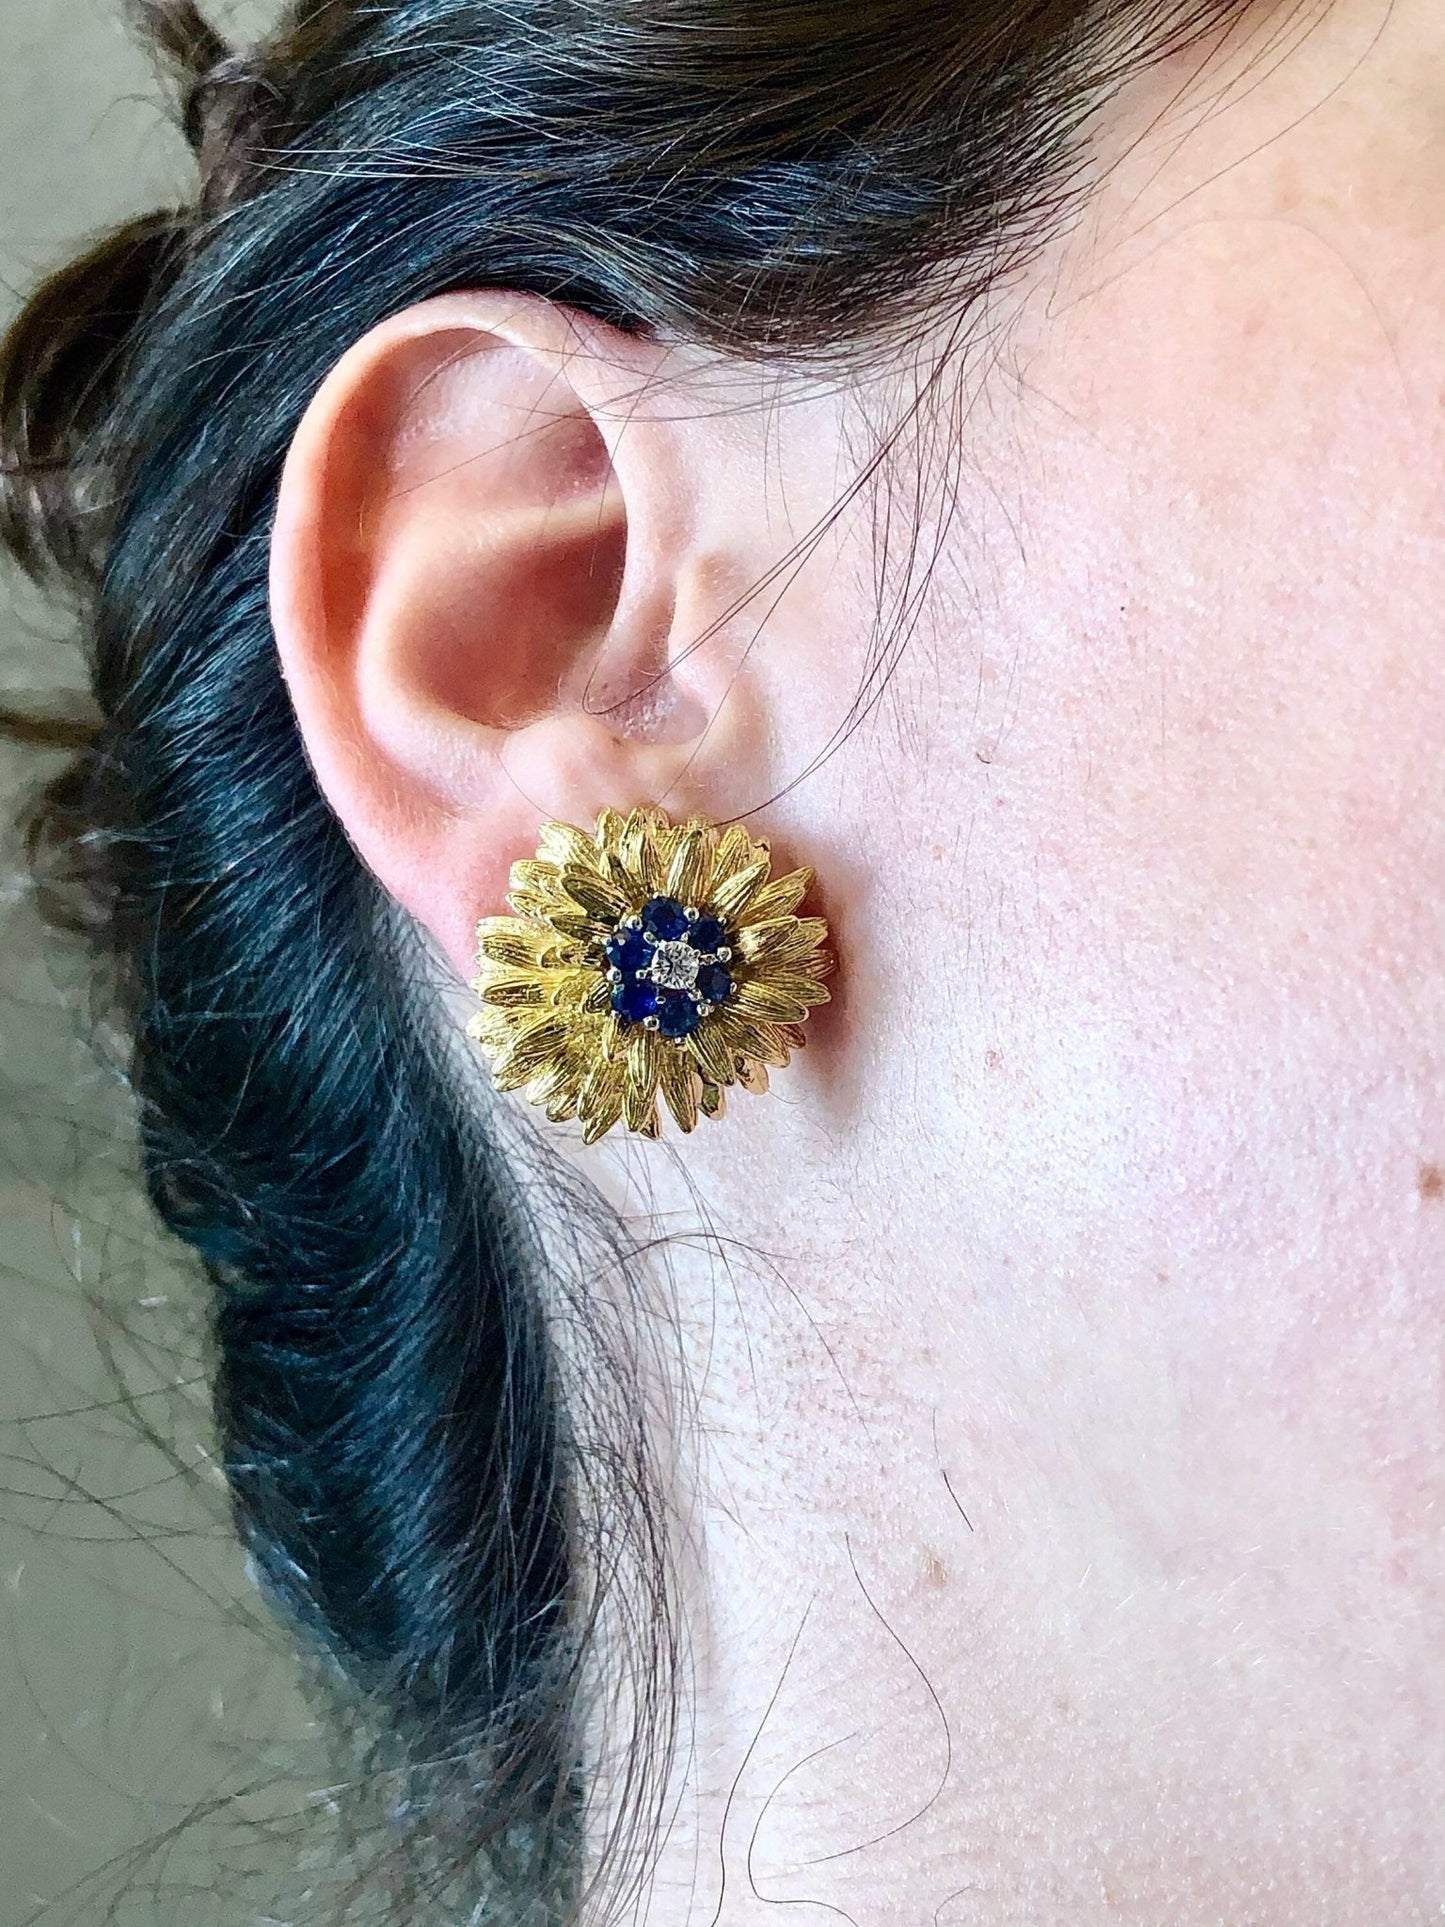 Magnificent Vintage 18K Sapphire & Diamond Flower Earrings - Handcrafted Yellow Gold - Sapphire Earrings - Holiday Gift - Birthday Gift